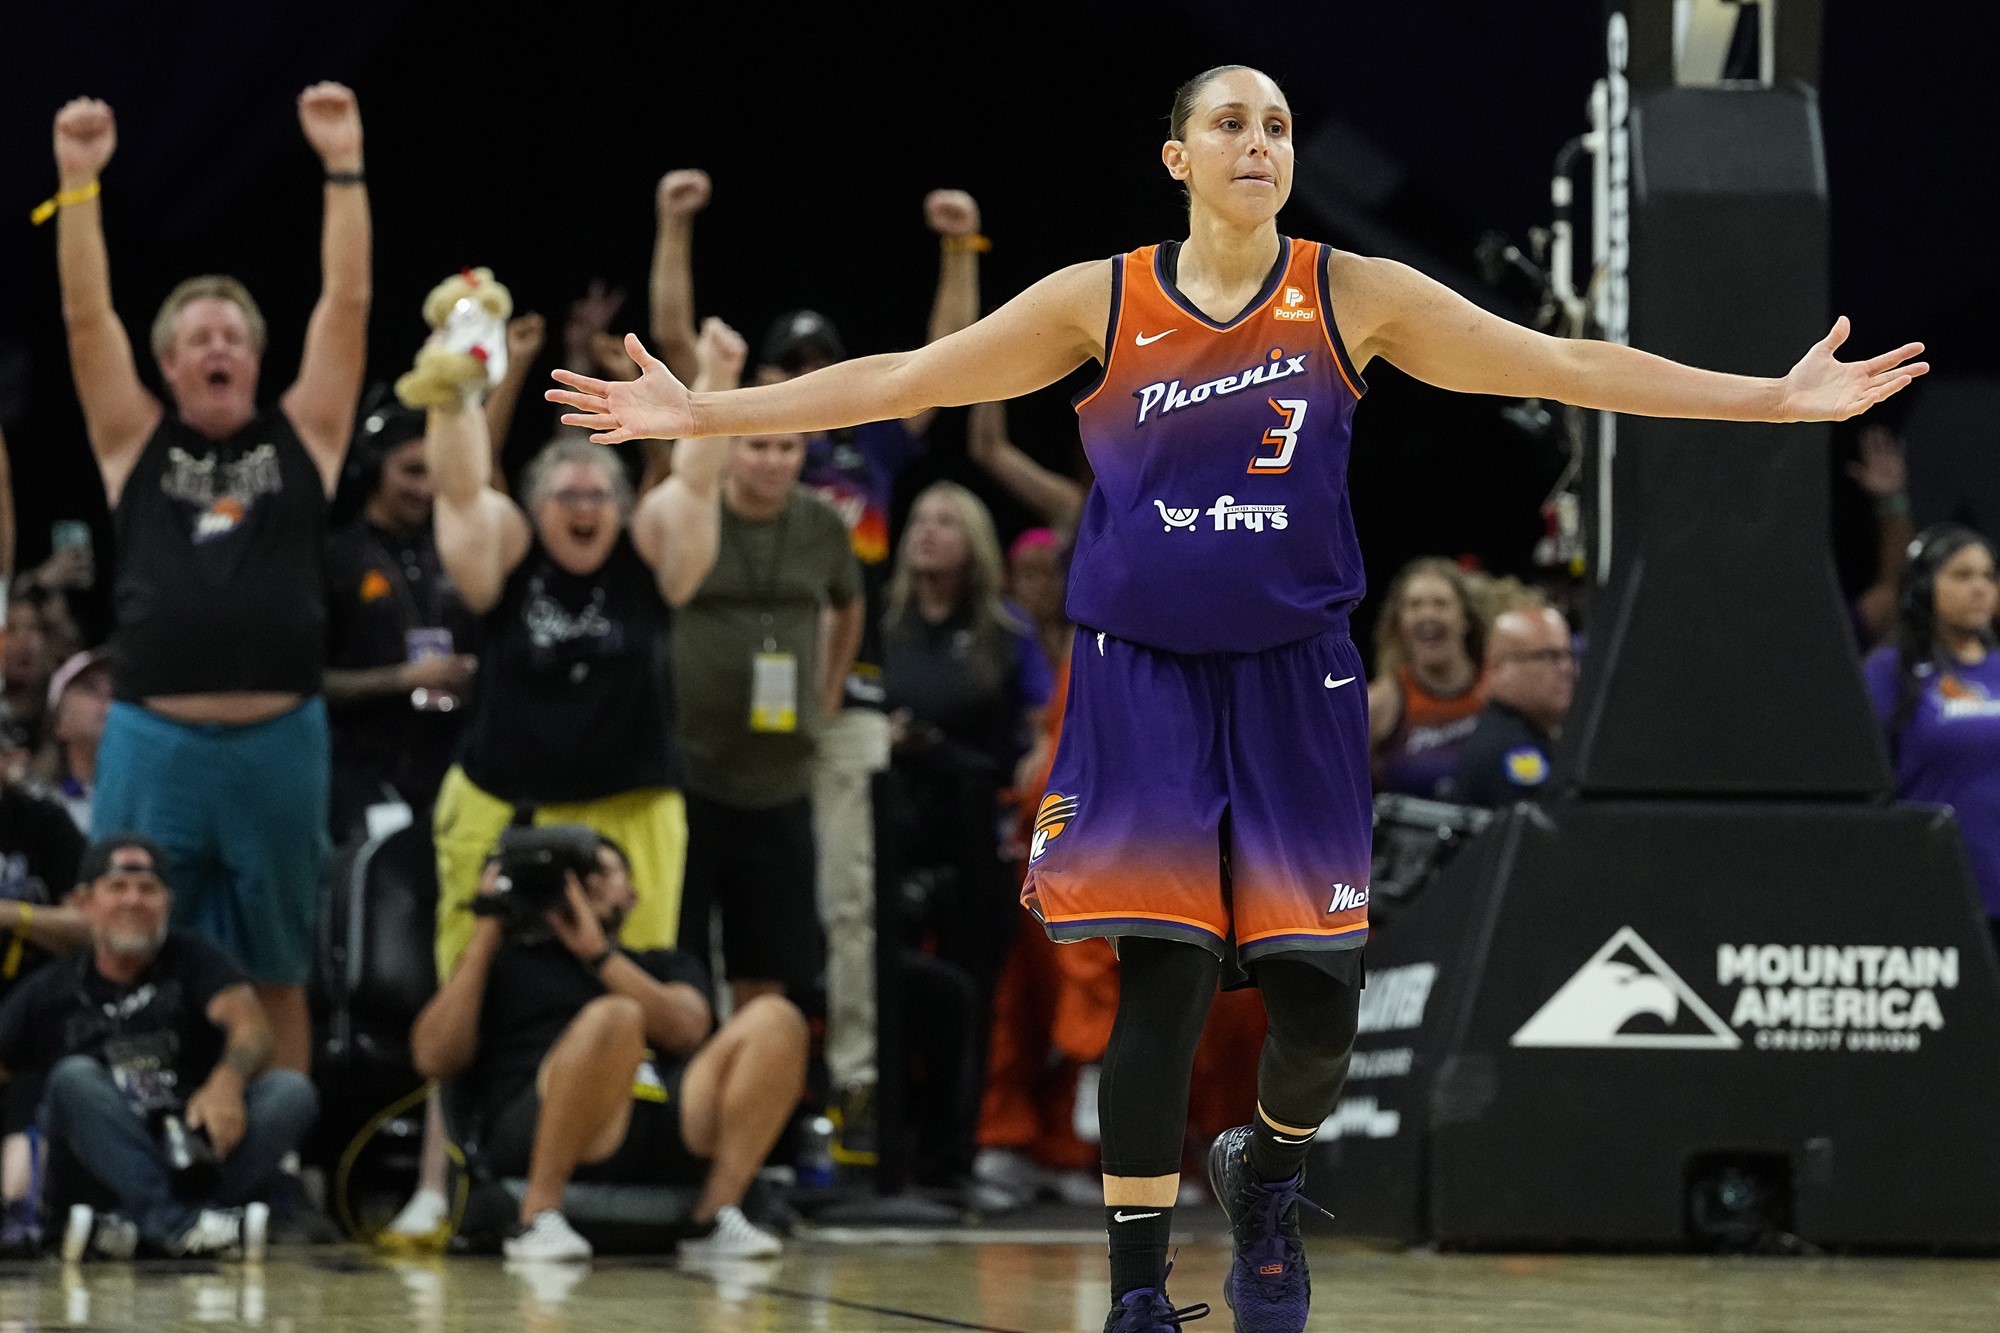 A female basketballer raises both arms in celebration during a game, with the crowd cheering on